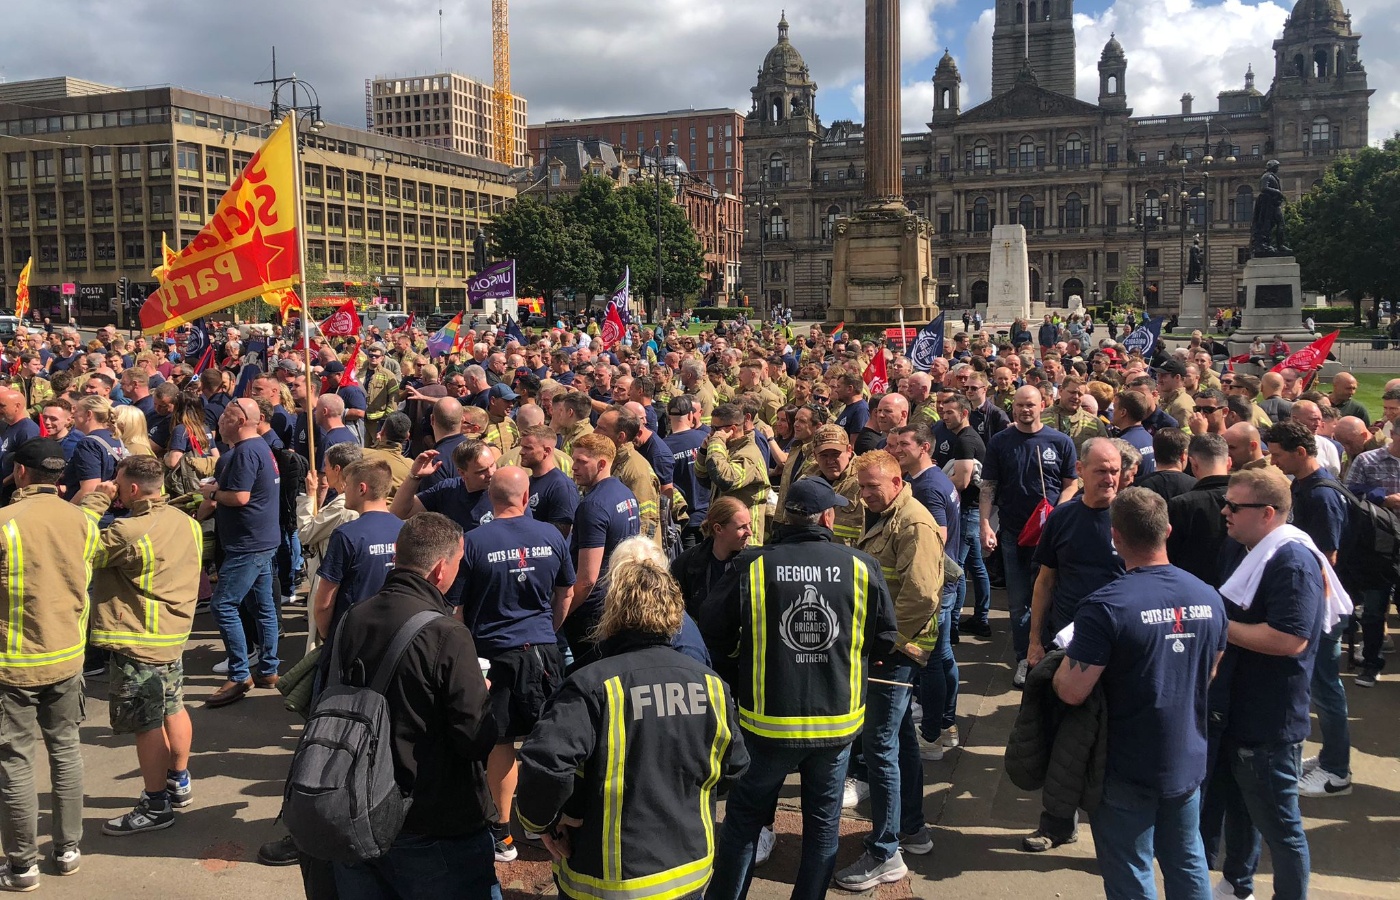 Firefighters gathered to protest in George Square.